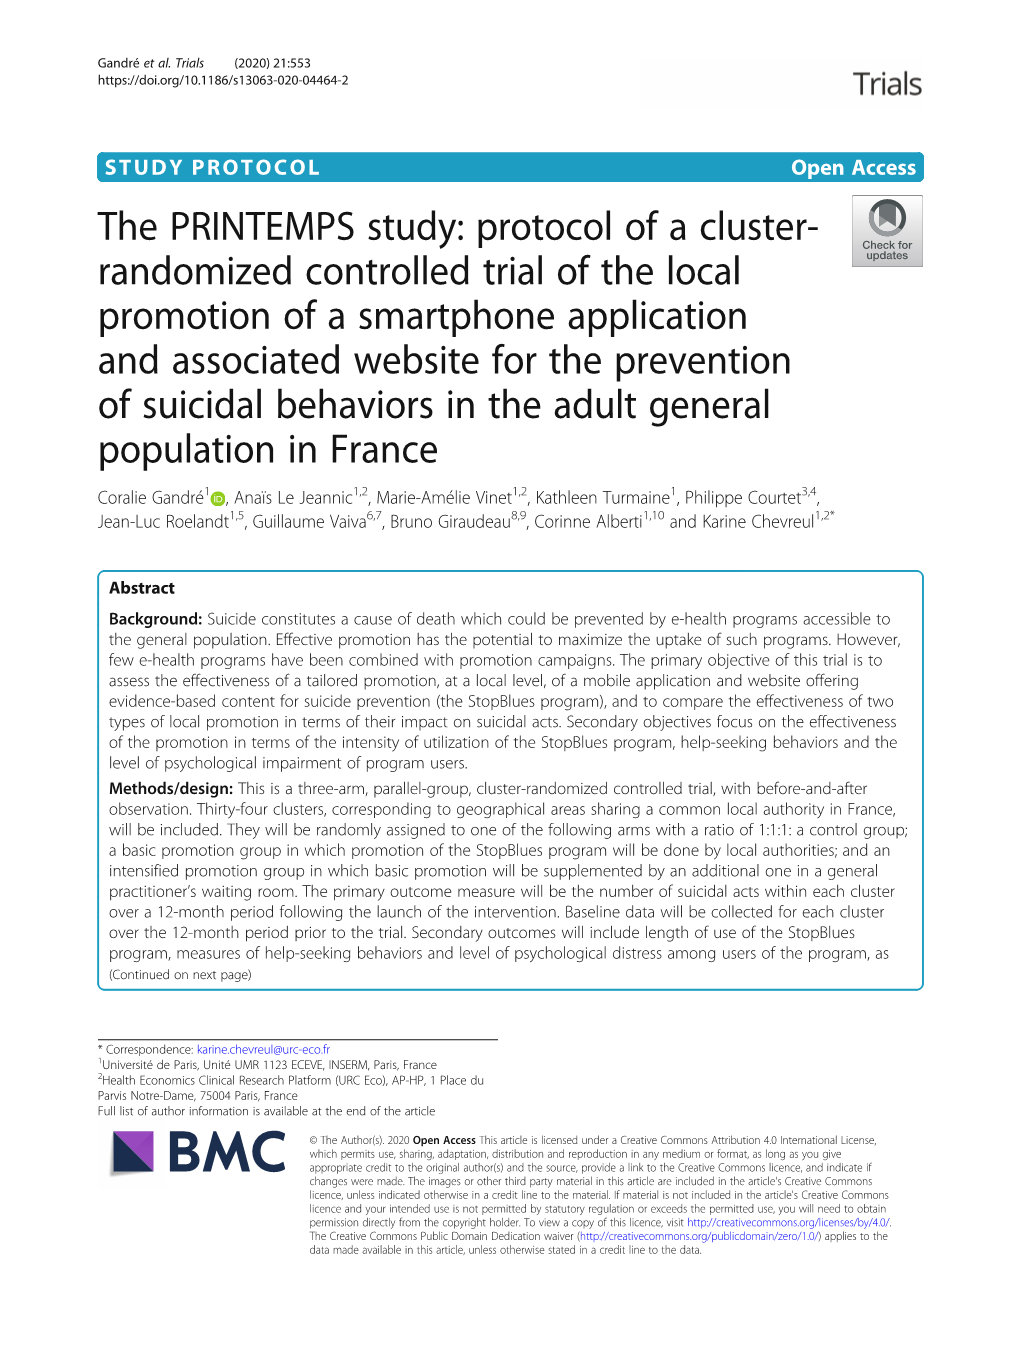 The PRINTEMPS Study: Protocol of a Cluster-Randomized Controlled Trial